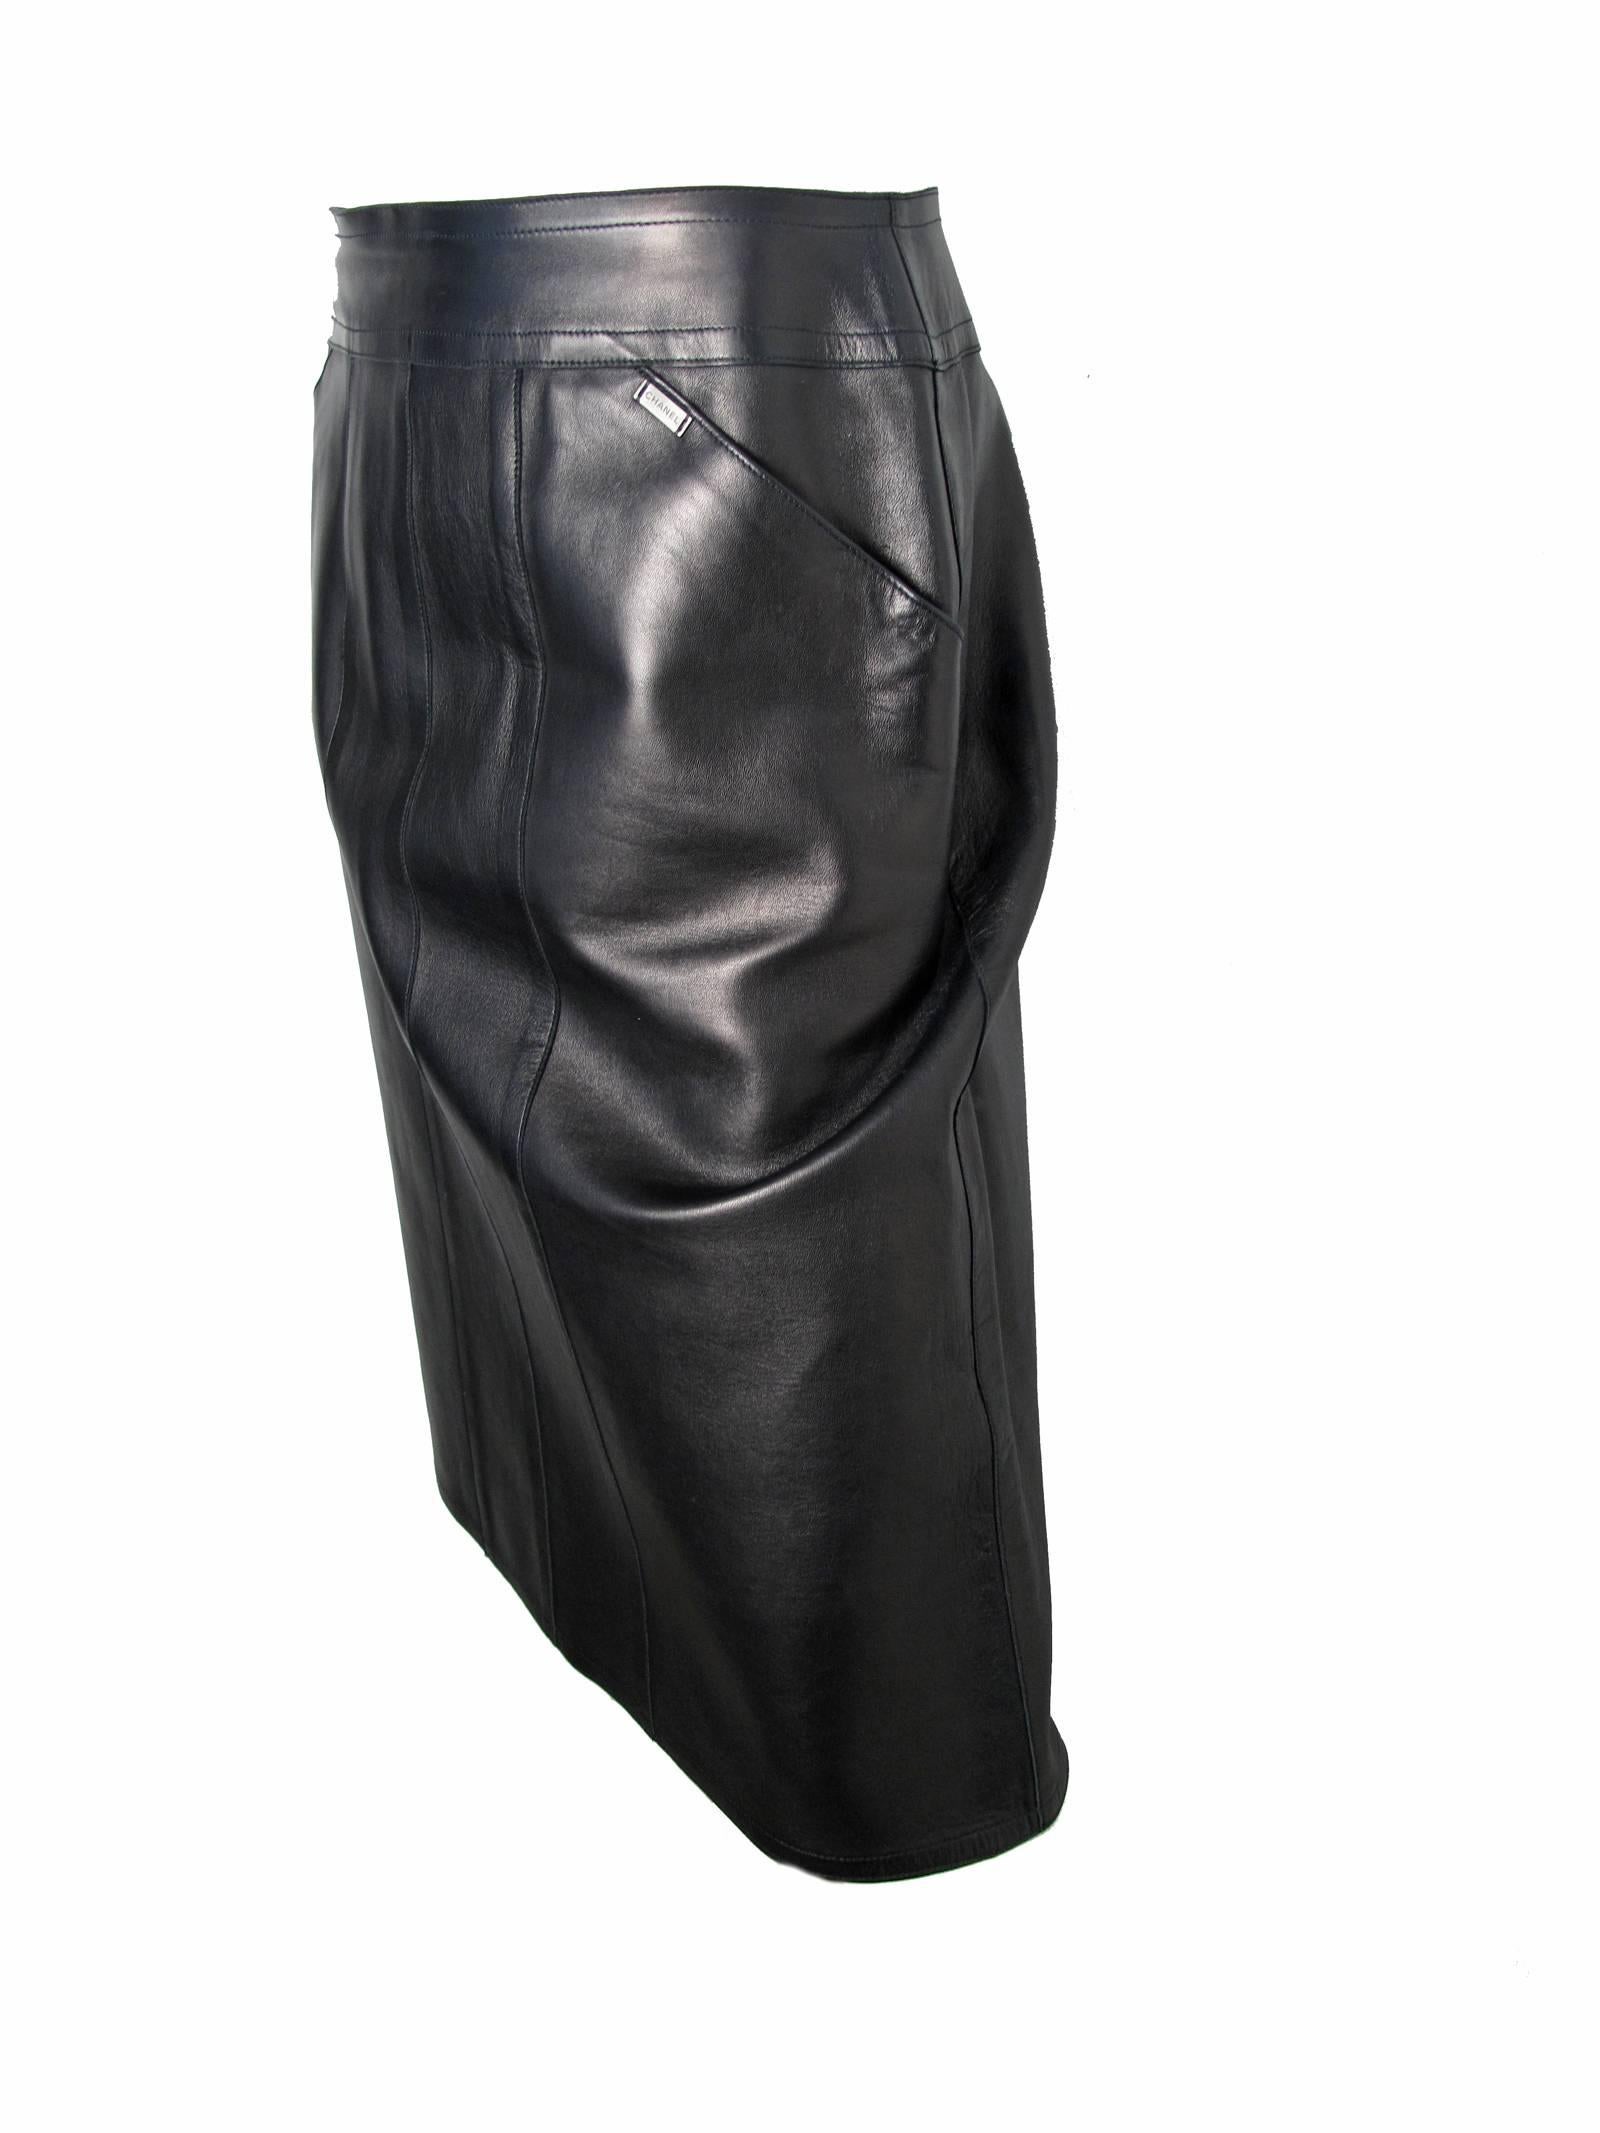 1999 Chanel black leather skirt ( lambskin ) Two front pockets.  Condition: Very good, previously worn.  Size 40 / US  8 

We accept returns for refund.  We offer free Ground Shipping within the US.  Please let us know if you have any questions.